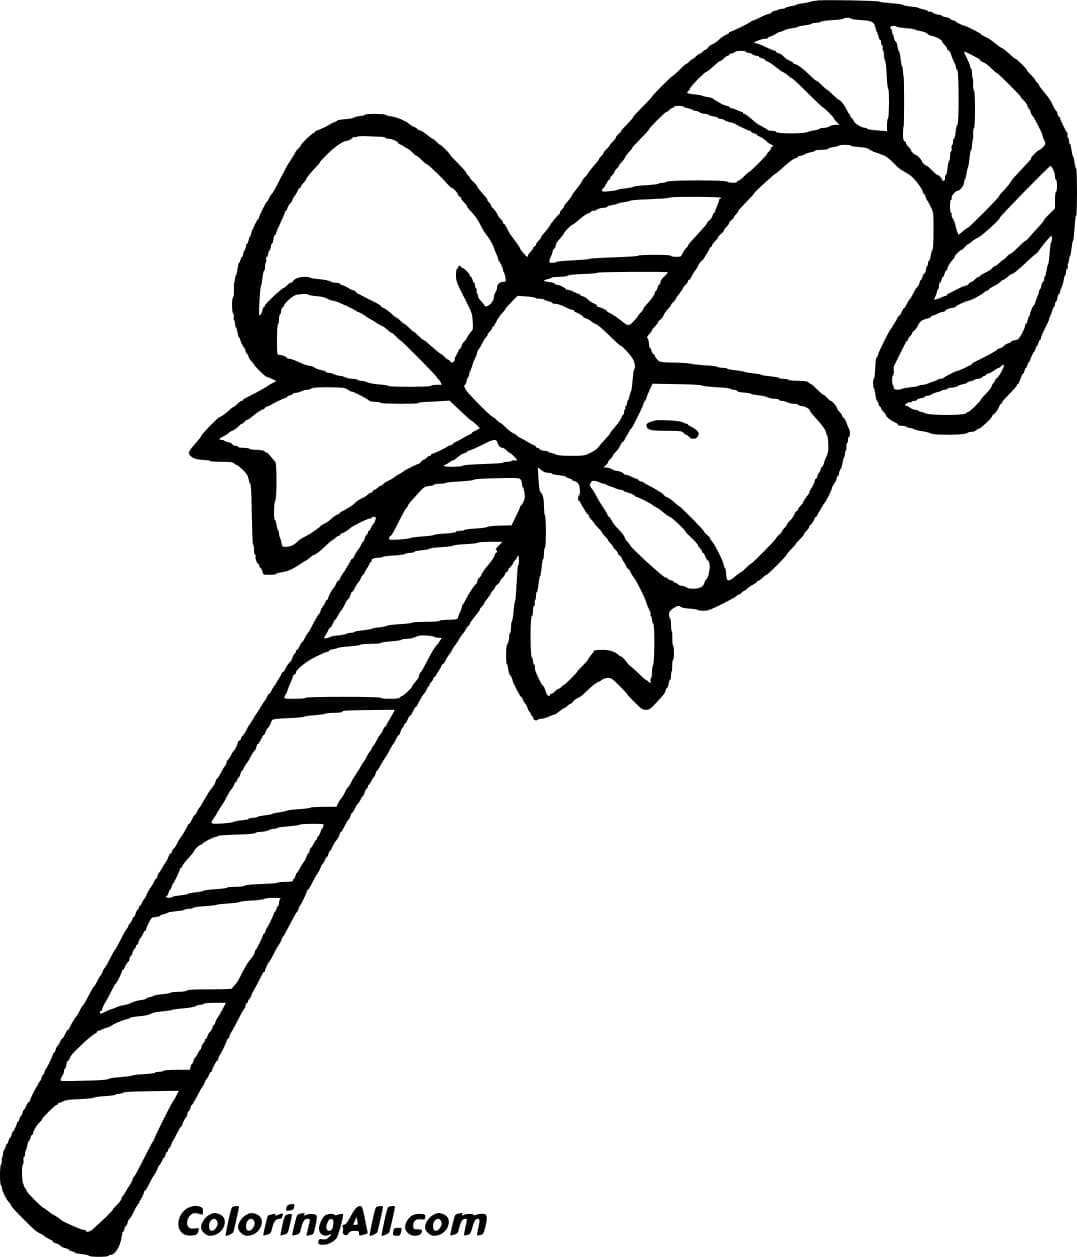 Thin Tilted Candy Cane Coloring Page